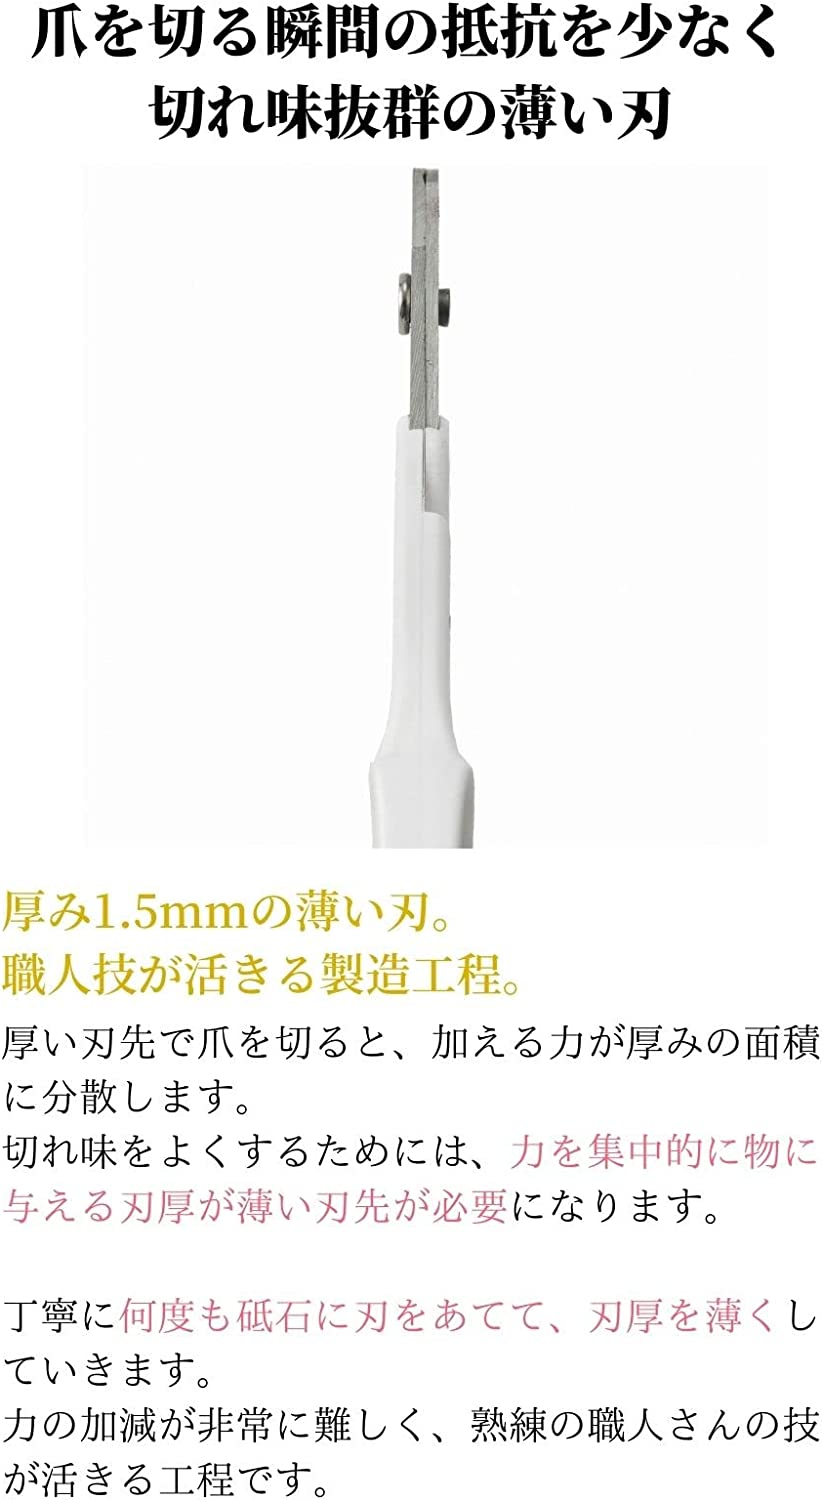  cat . nail clippers -stroke less no spa. break cat for nail clippers made in Japan 